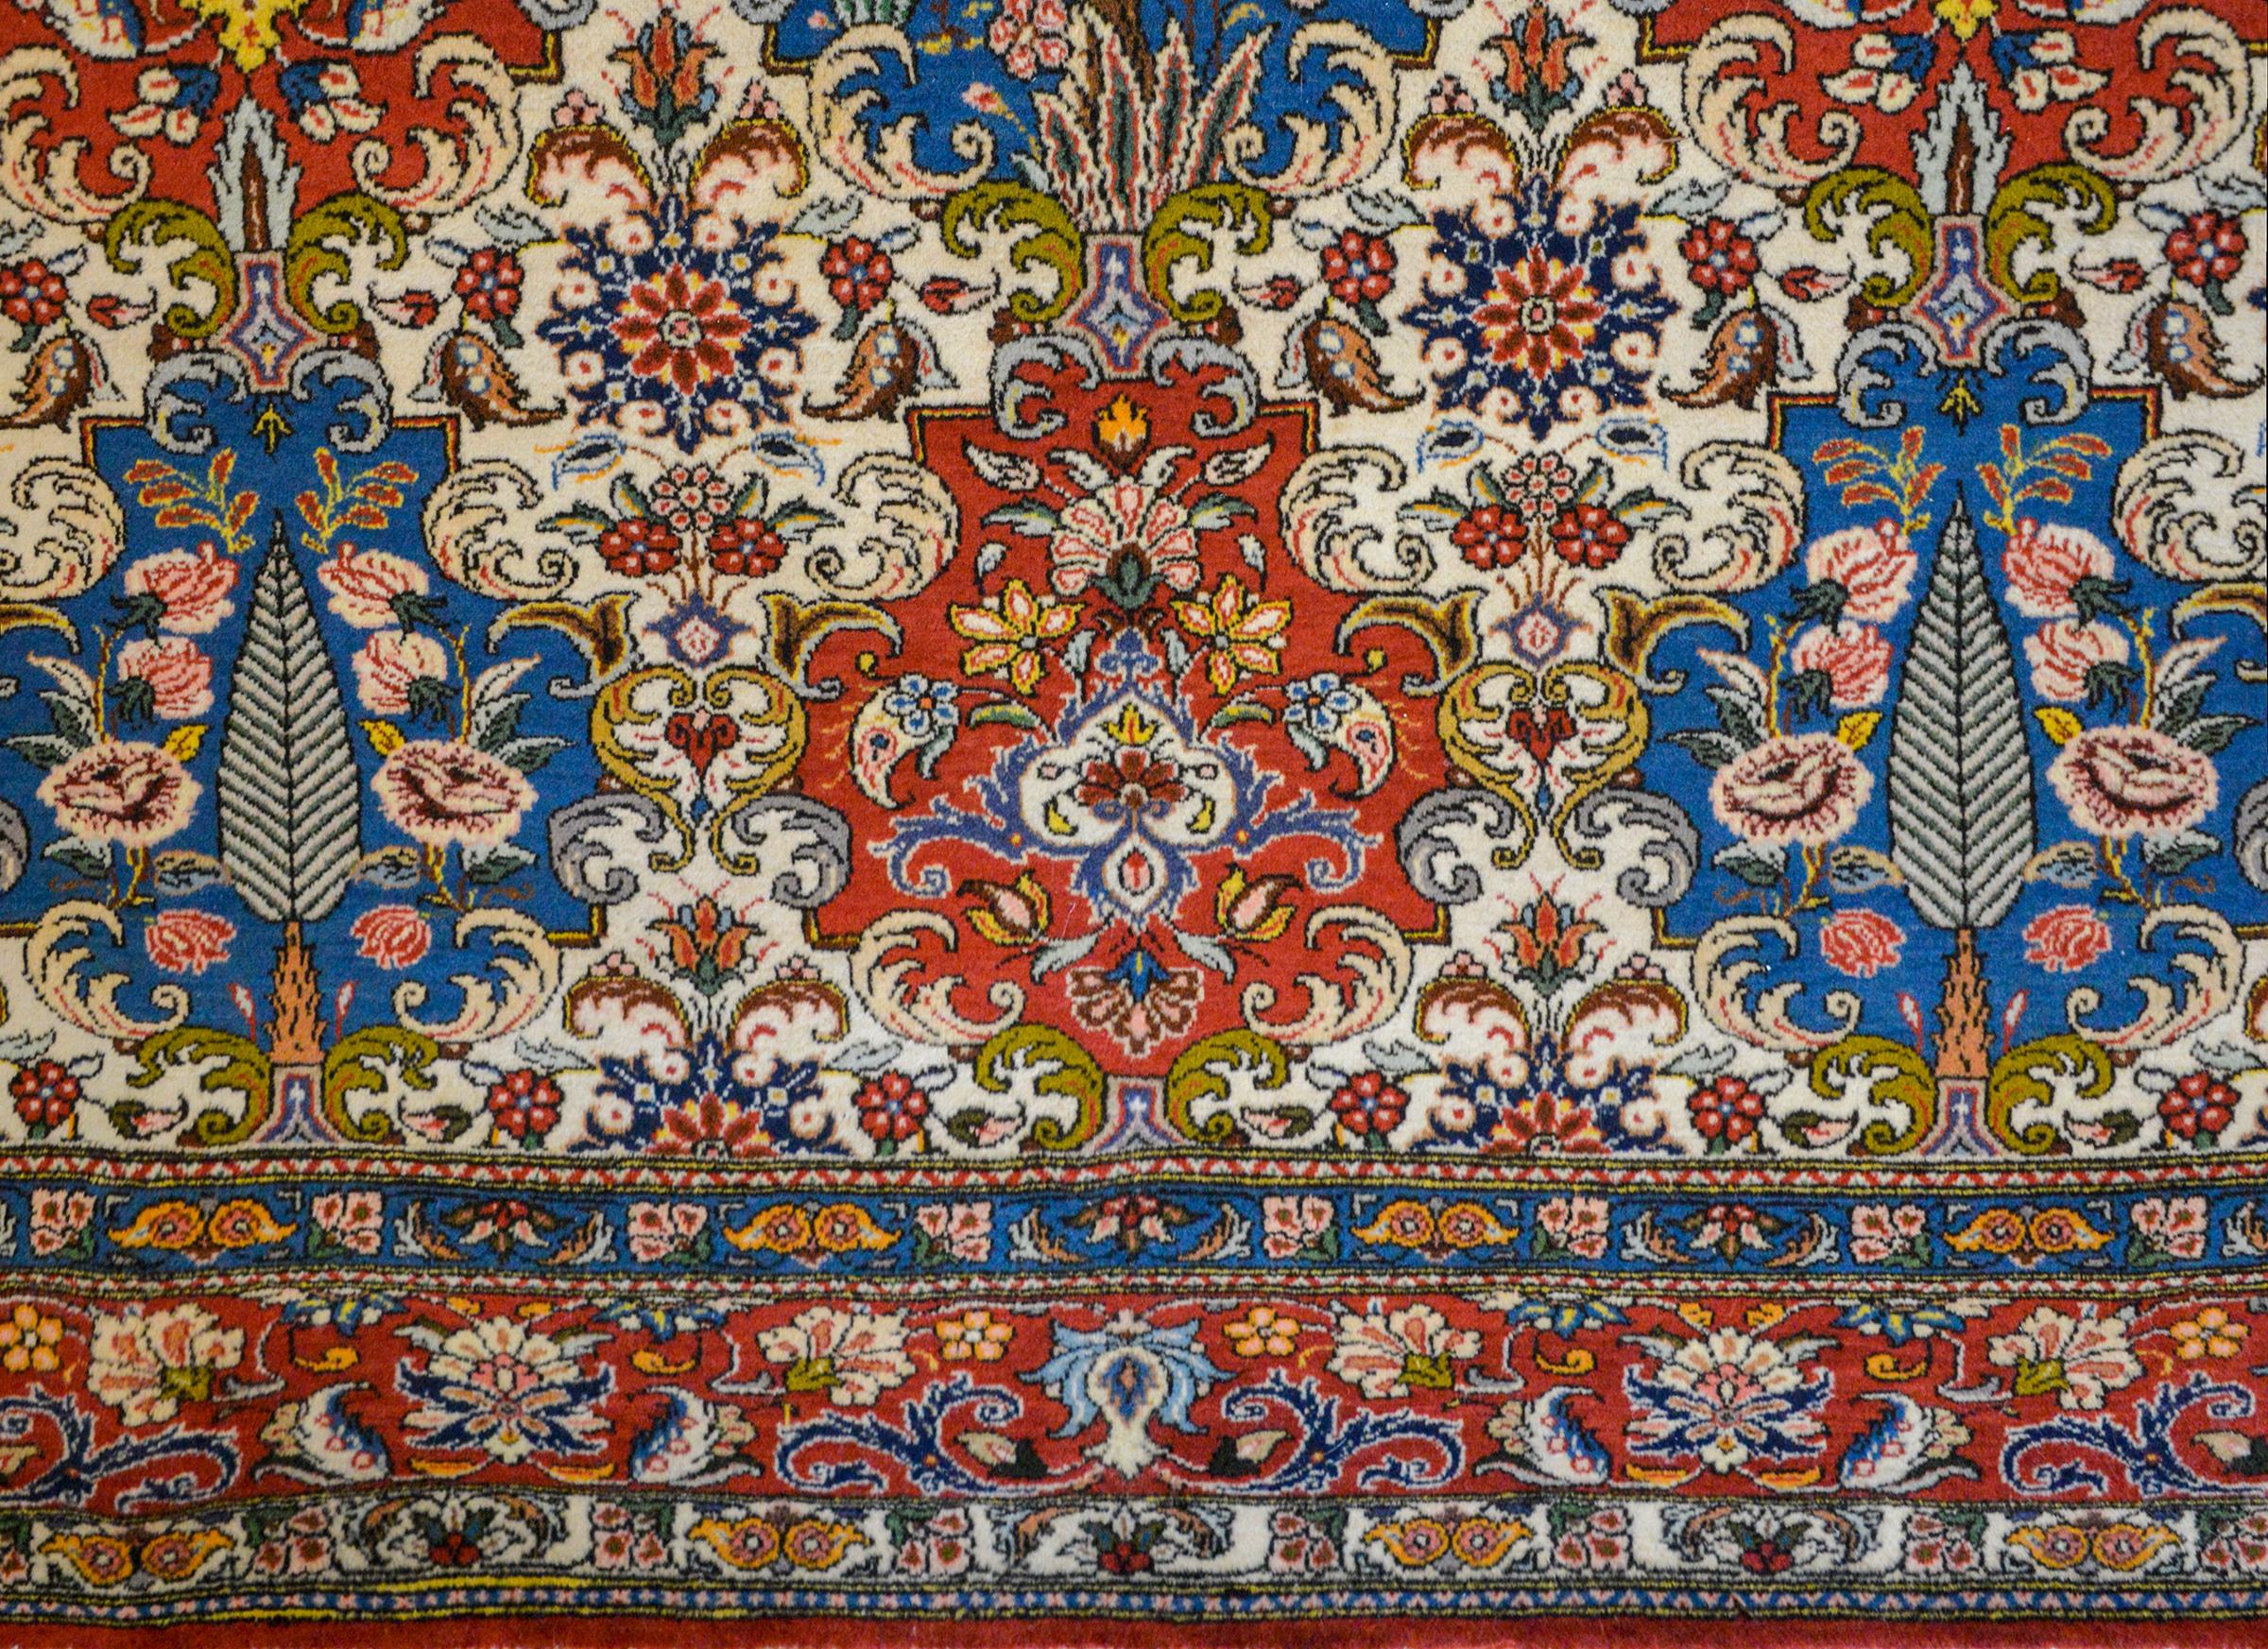 An outstanding vintage Persian Bakhtiari rug with a wonderful Baroque pattern containing myriad trees and floral medallions amidst more scrolling flowers and leaves, and surrounded by multiple floral partnered borders.